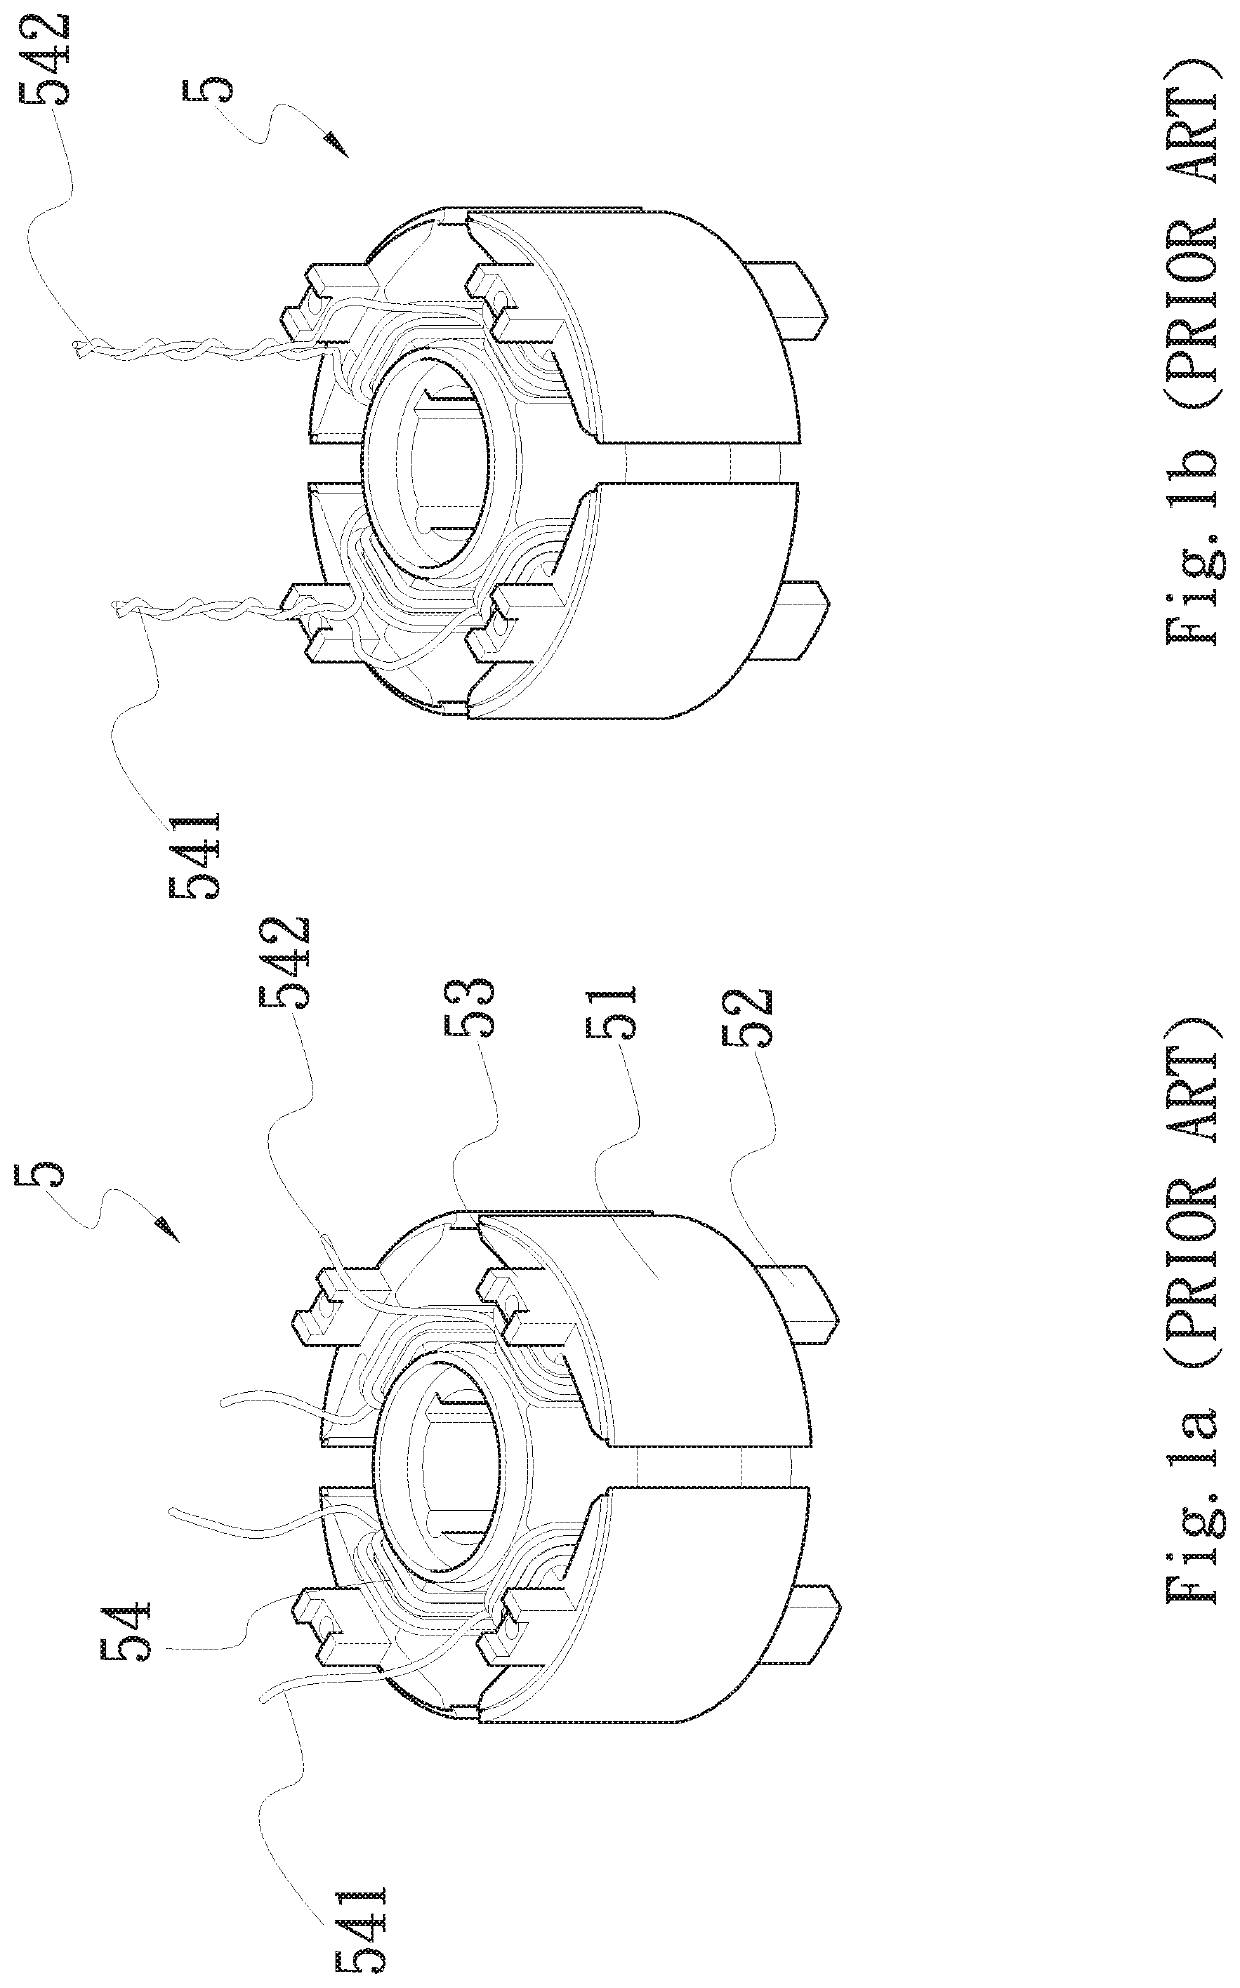 Manufacturing method of fan stator structure